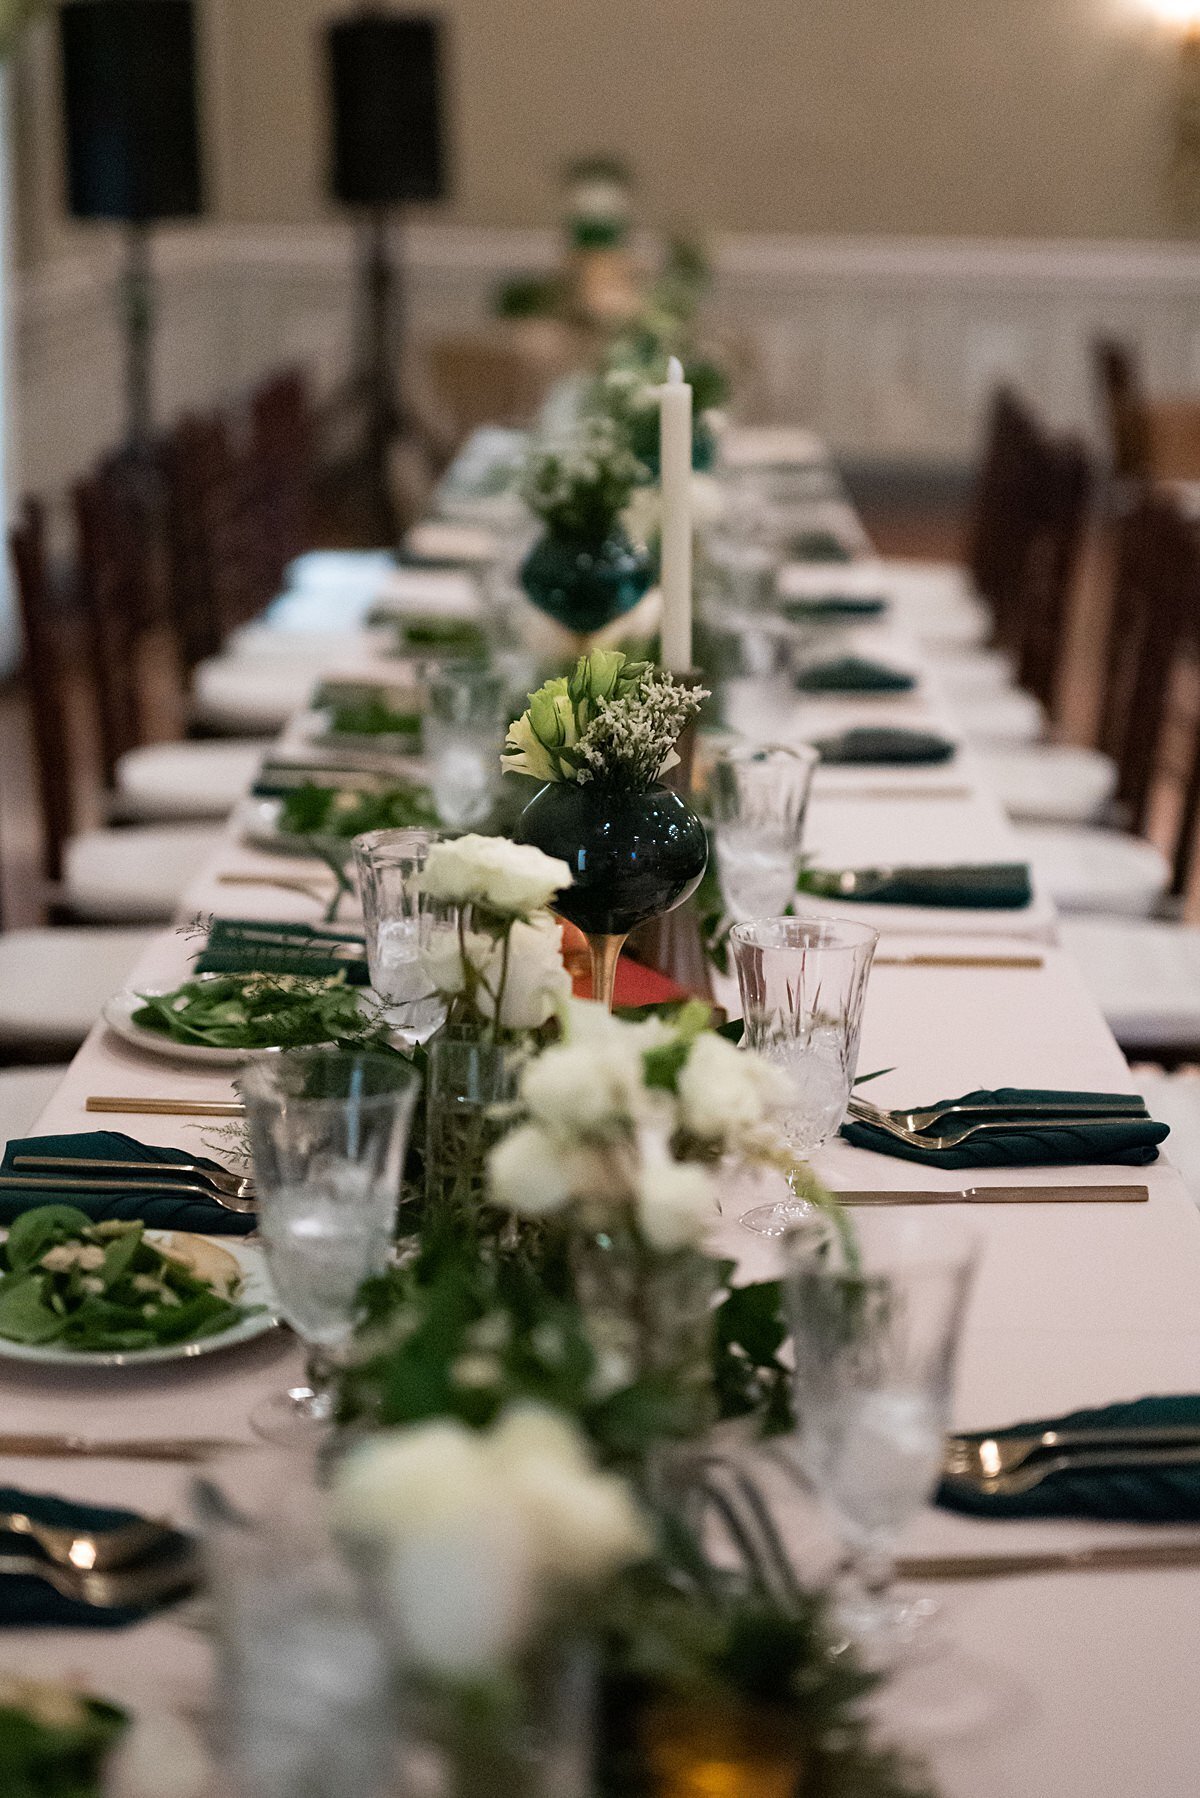 Long white table with a garland of greenery and white flowers accented with emerald and gold candle holders with white taper candles. The table is set with emerald green napkins, gold flatware and salads.